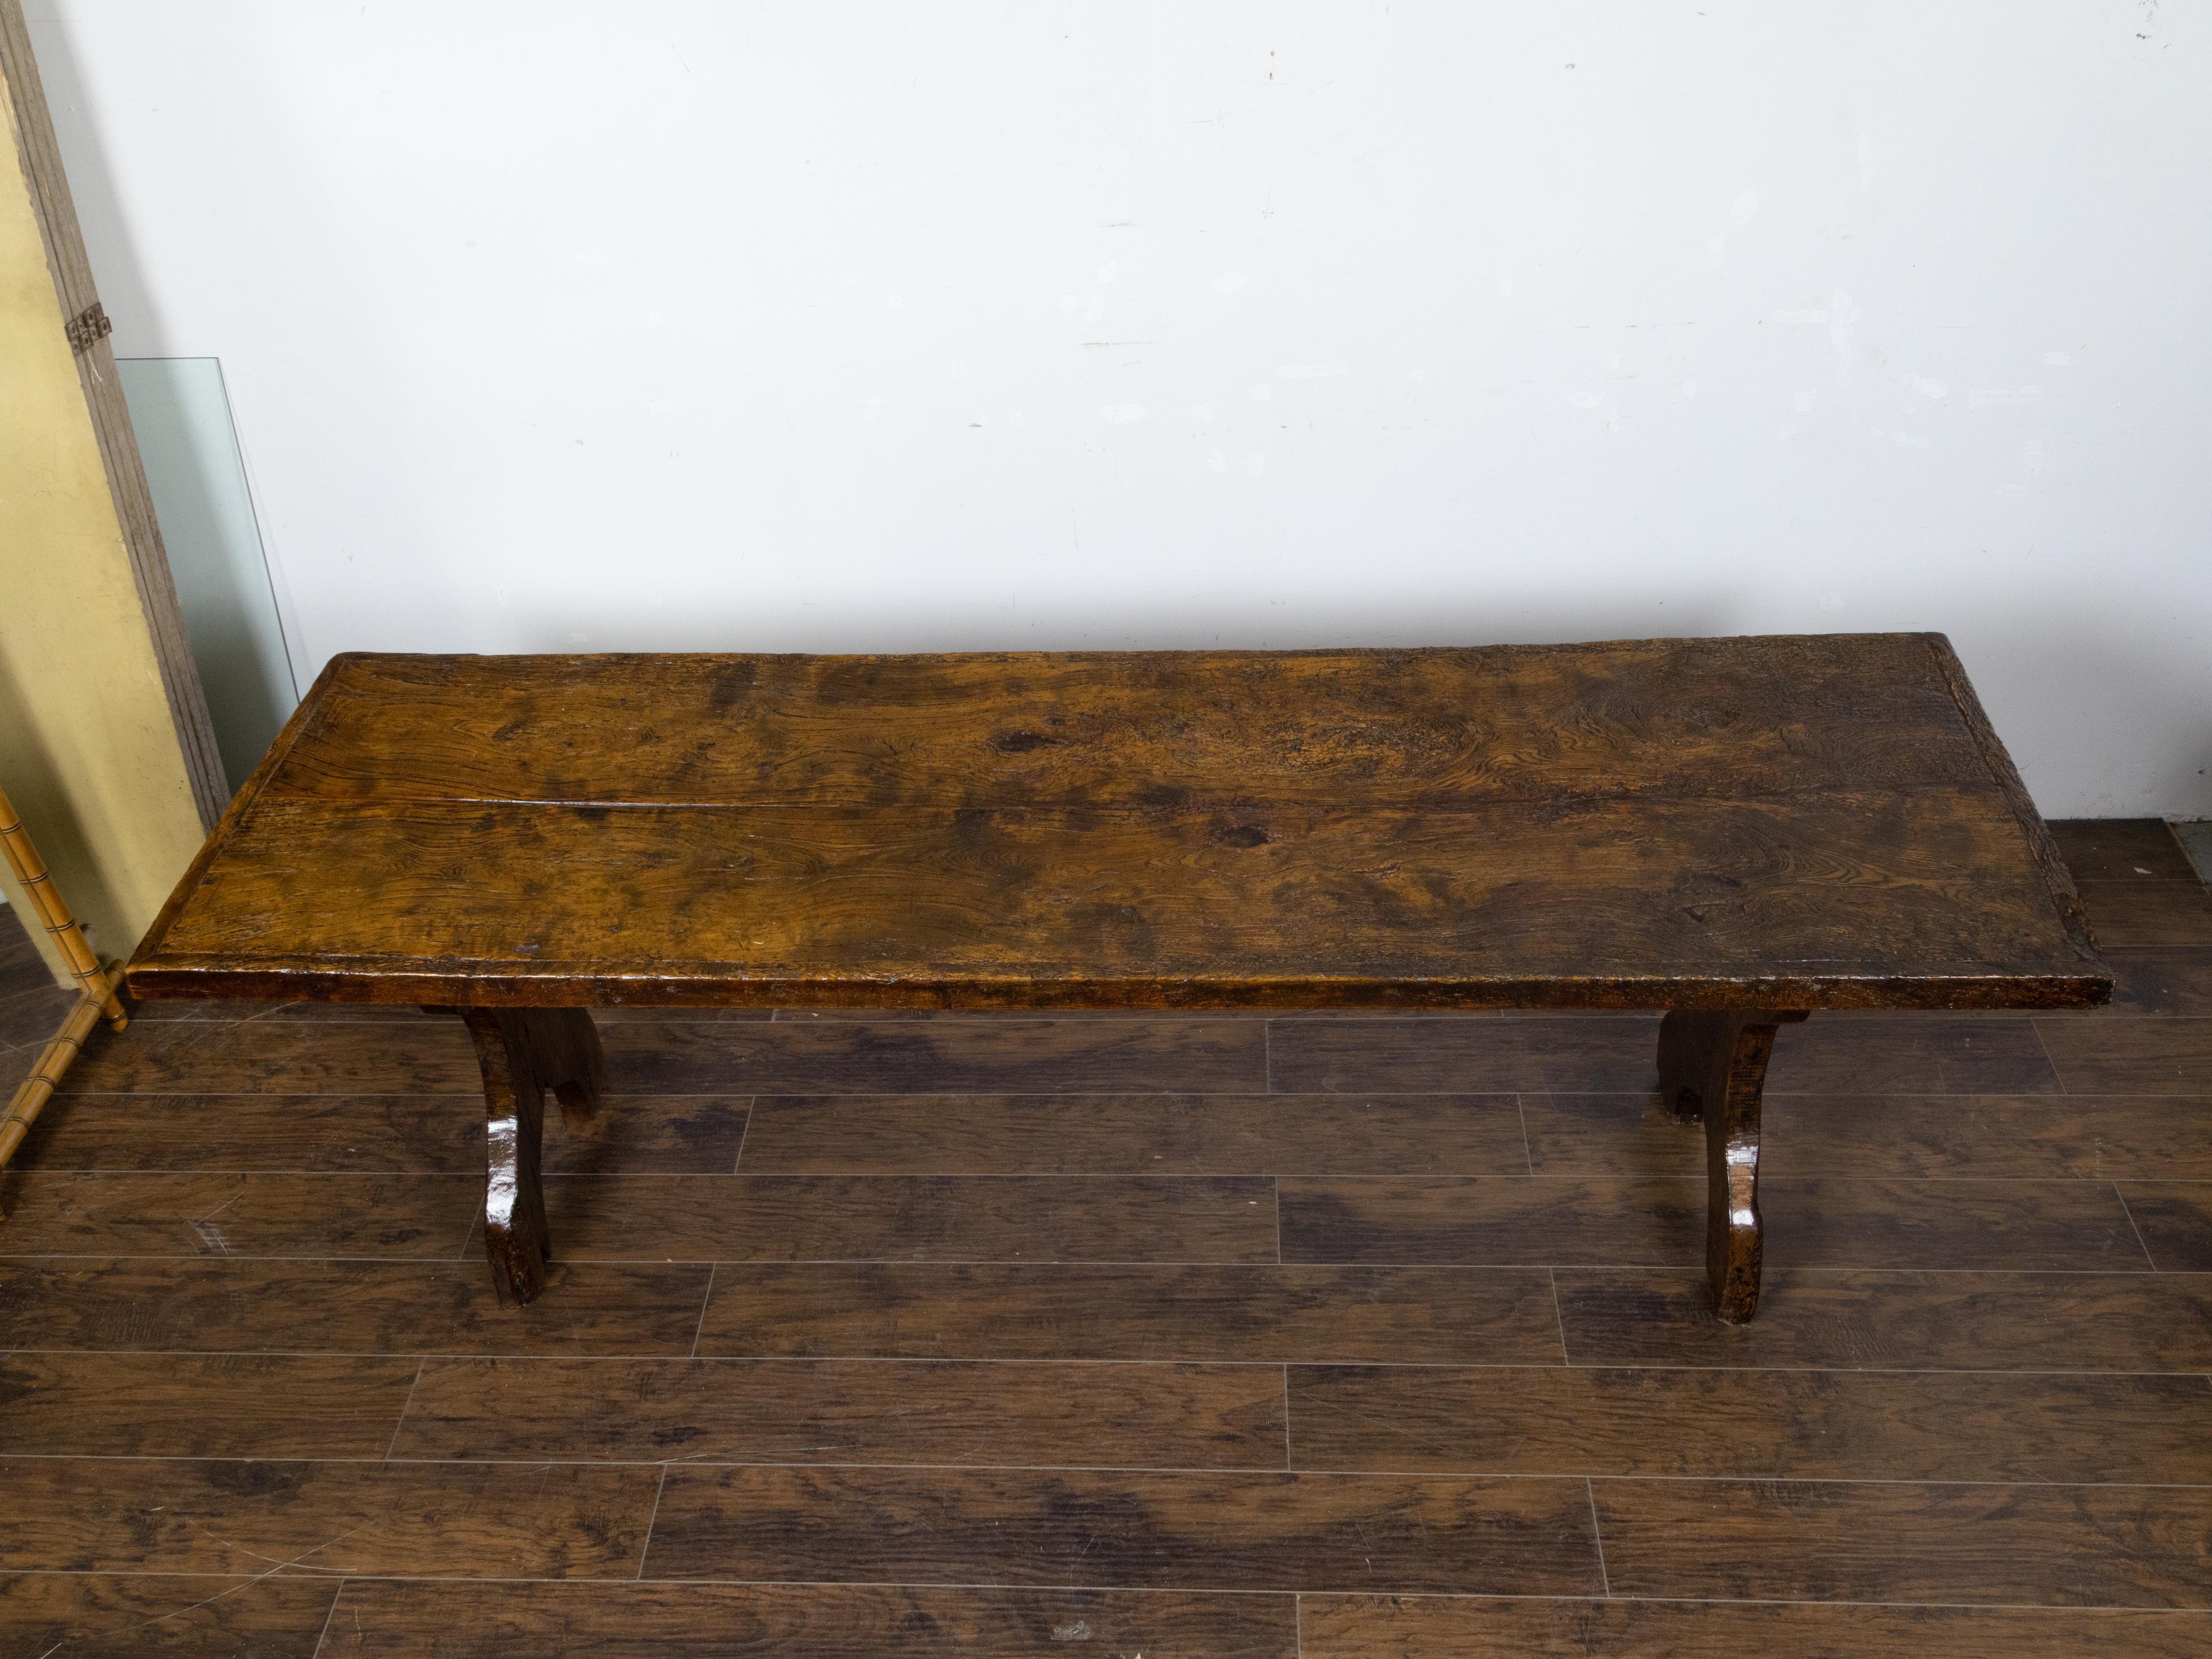 Italian 1800s Walnut Farm Table with Carved Legs, Stretcher and Weathered Patina For Sale 6